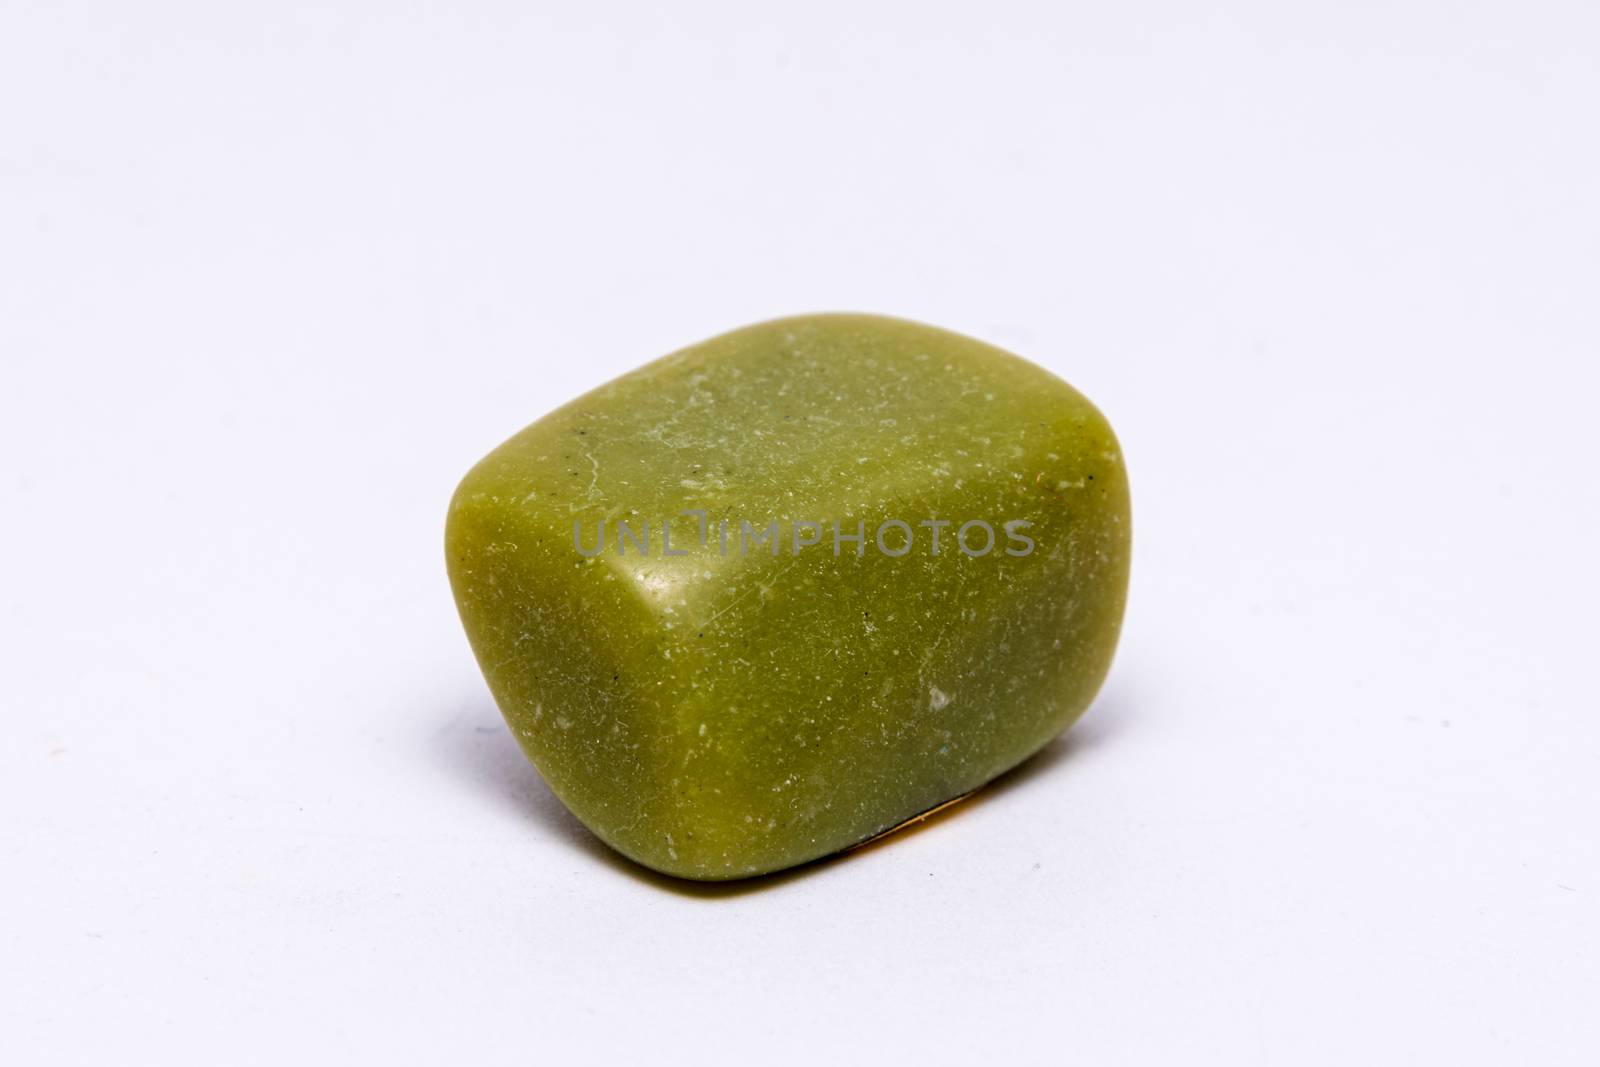 Butterstone butter jade stone yellow and green tones